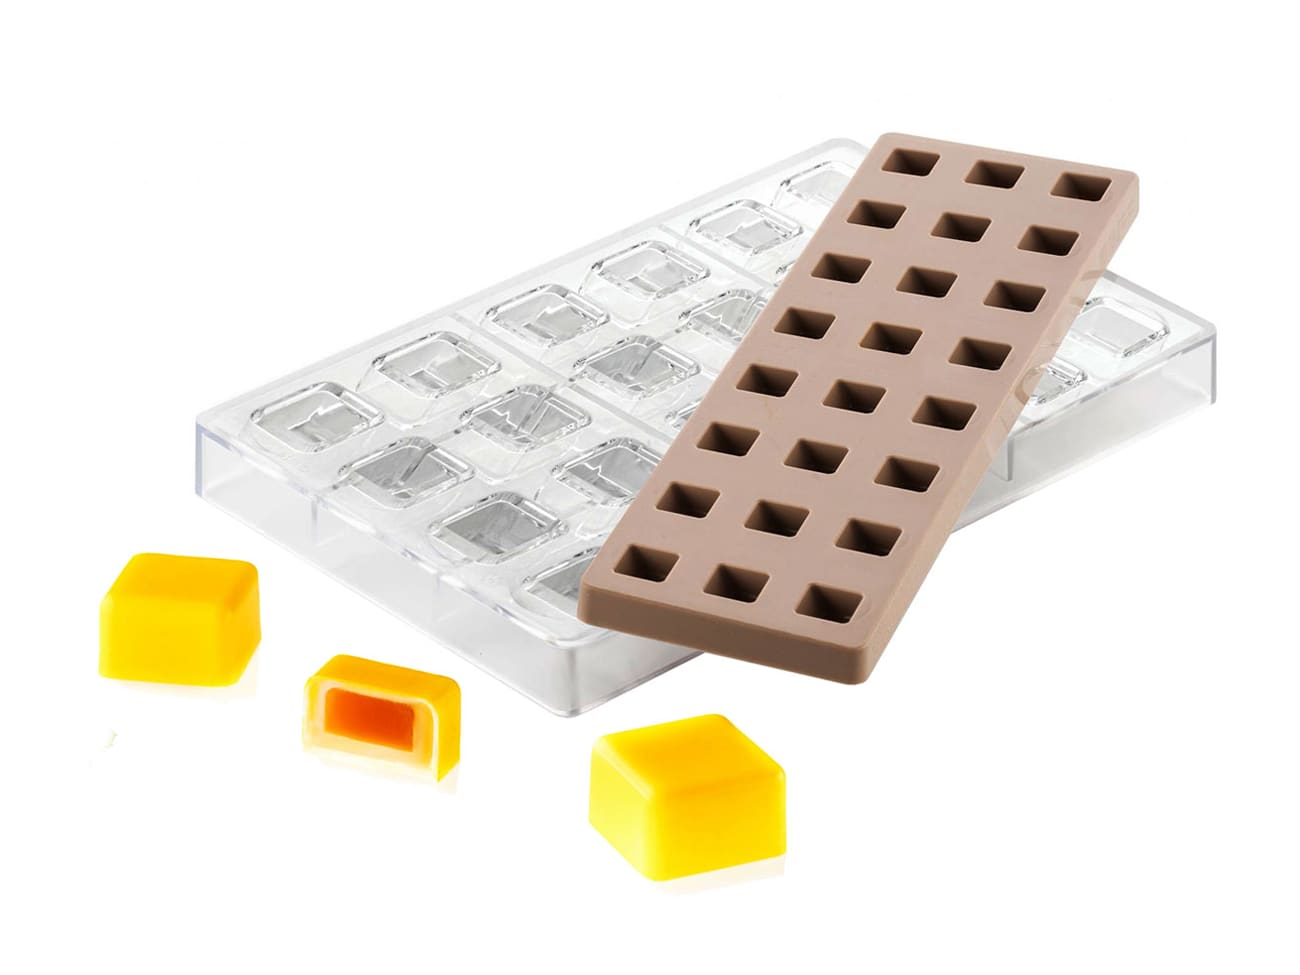 https://files.meilleurduchef.com/mdc/photo/product/sil/mould-tray-chocolate-with-insert-24-squares-2-5-x-2-5-cm/mould-tray-chocolate-with-insert-24-squares-2-5-x-2-5-cm-1-main-1300.jpg